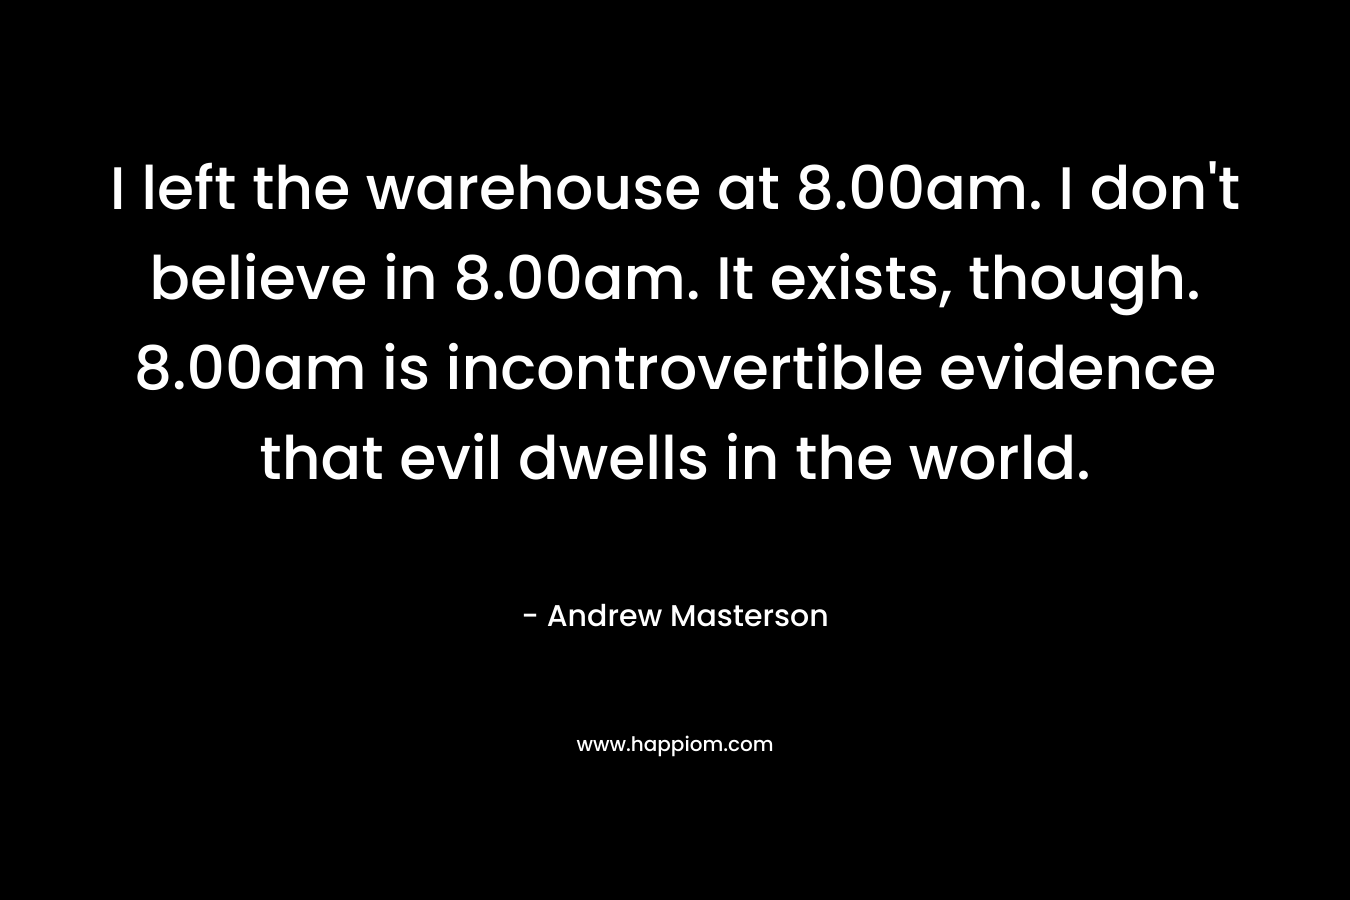 I left the warehouse at 8.00am. I don't believe in 8.00am. It exists, though. 8.00am is incontrovertible evidence that evil dwells in the world.